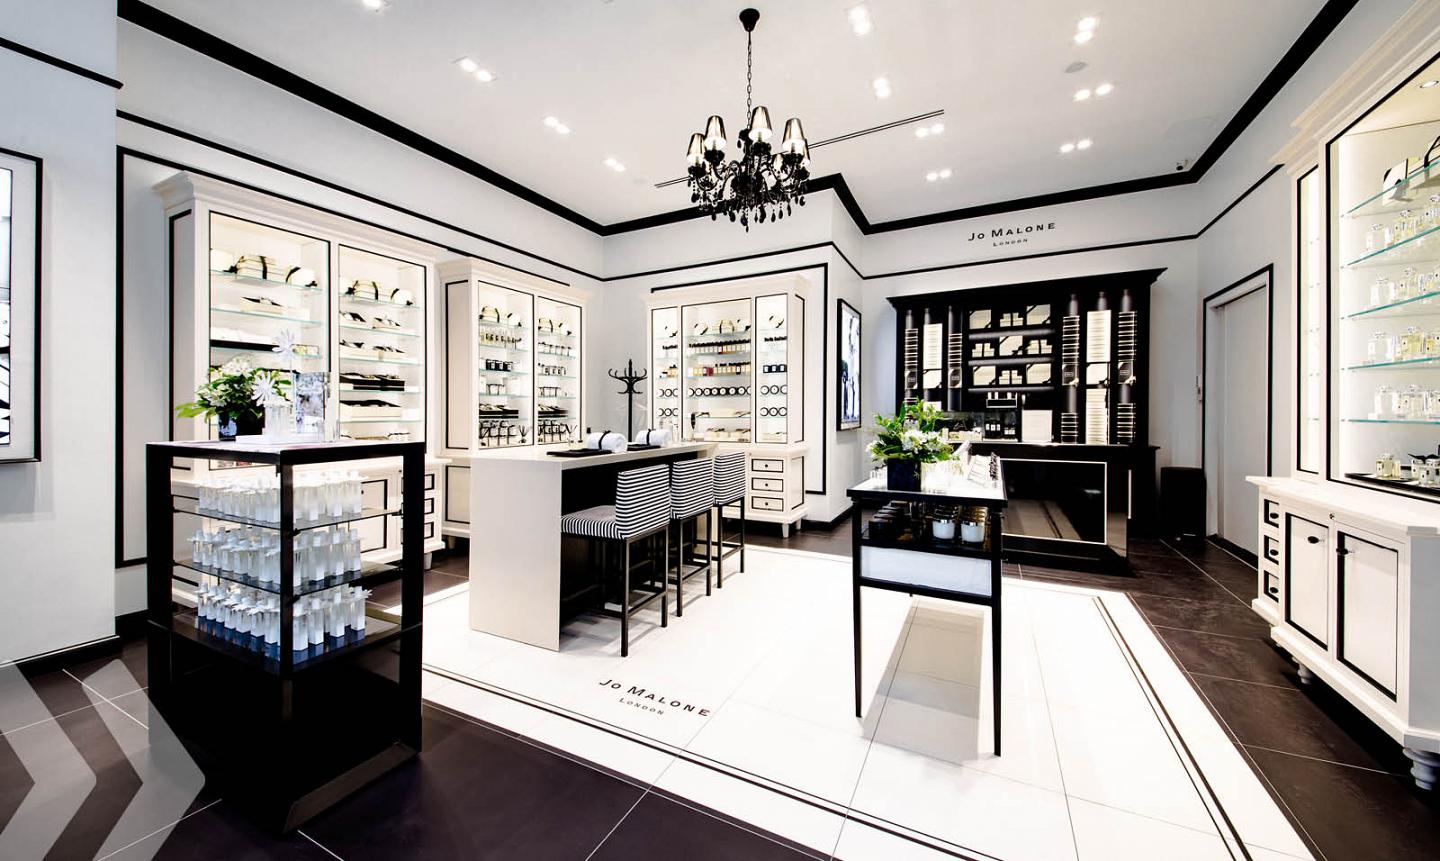 Jo-malone-flagship-store-made-by-arno-mittel2